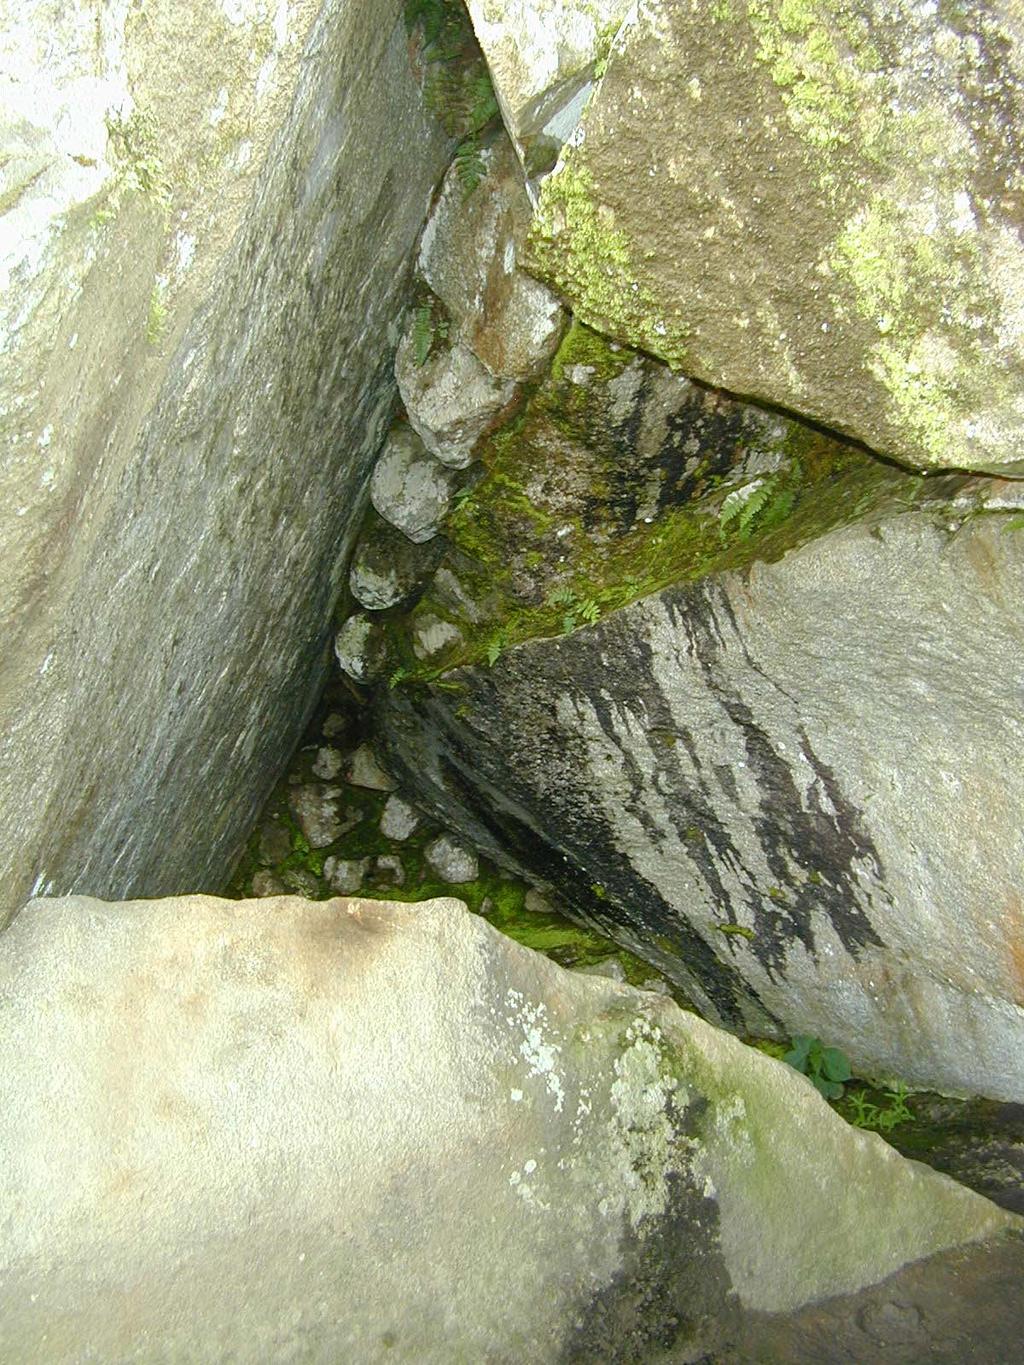 Some of these secret places beneath the boulders were enlarged.